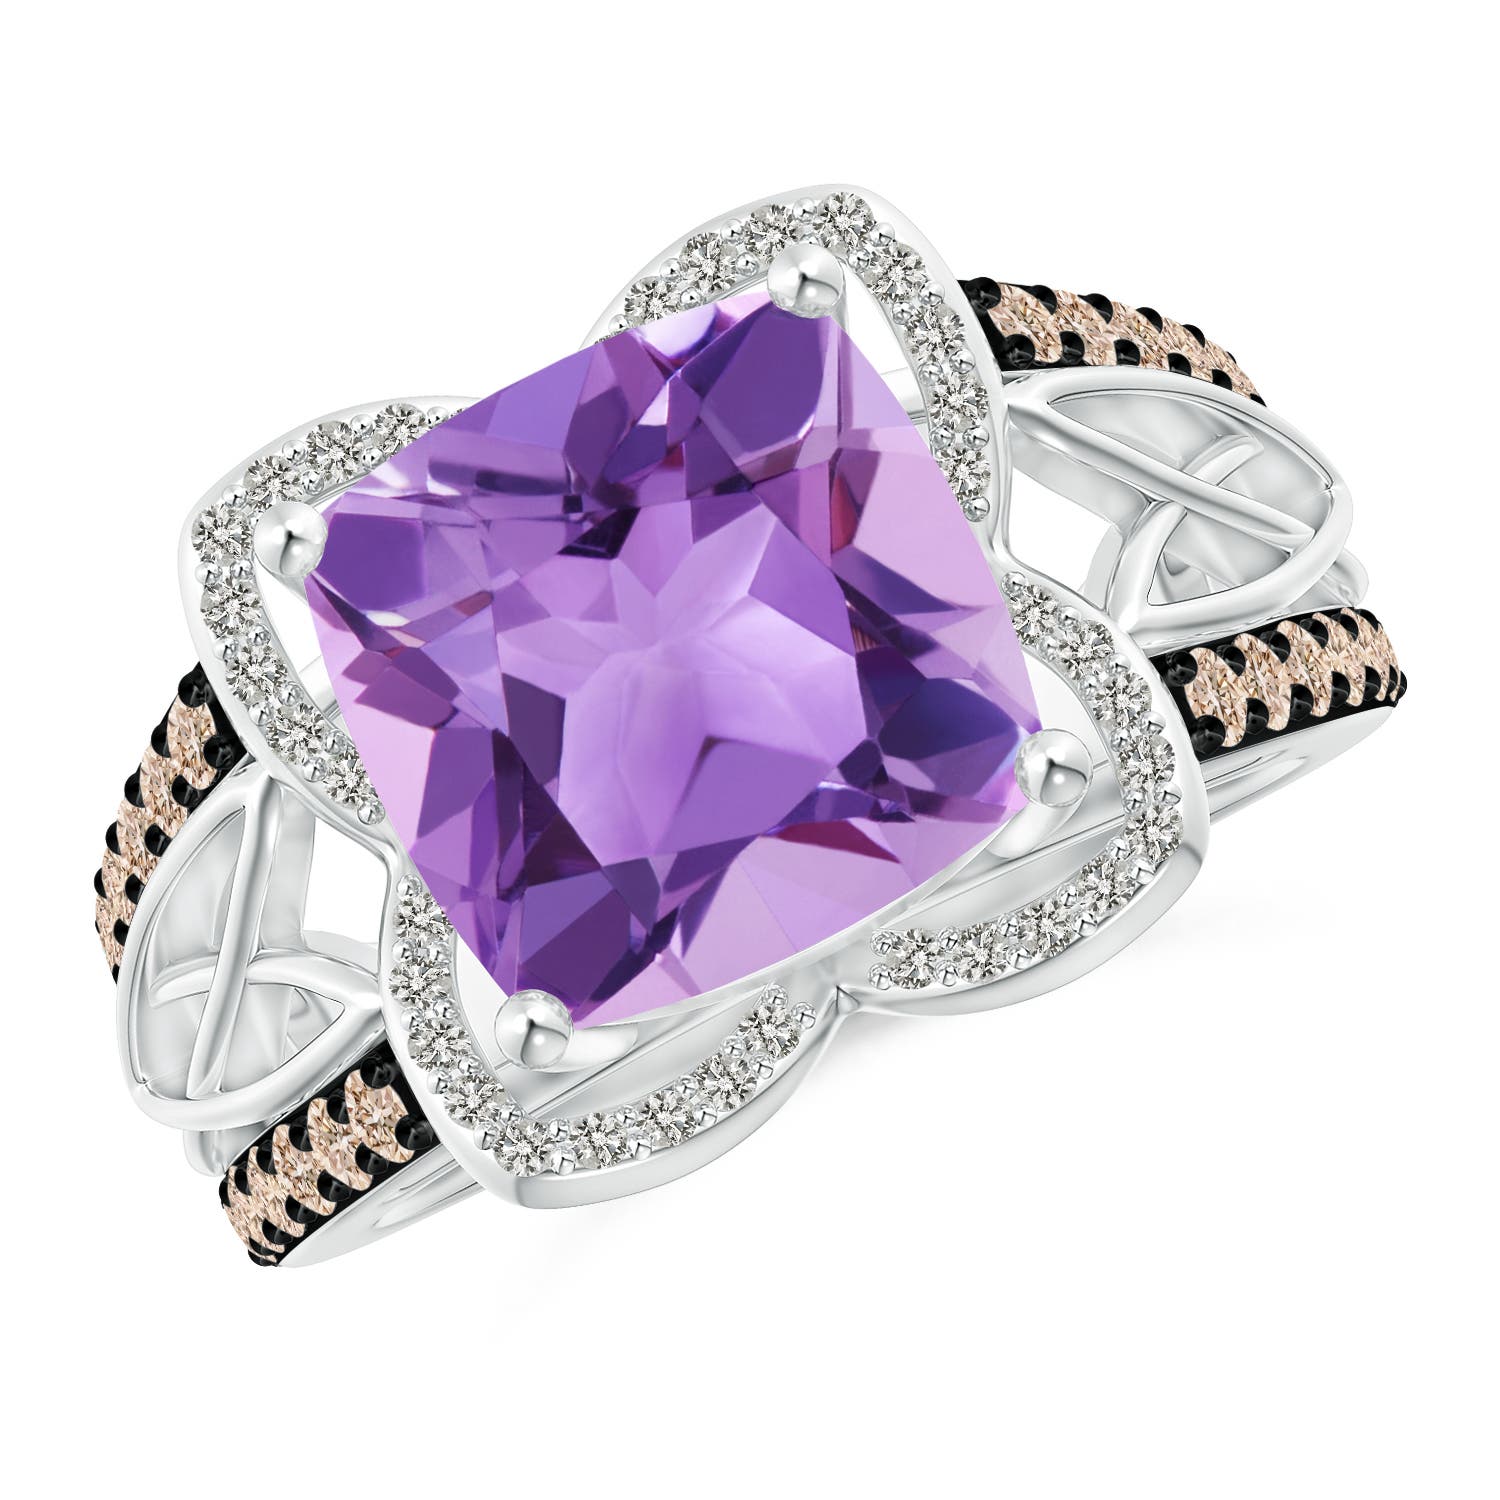 A - Amethyst / 4.41 CT / 14 KT White Gold